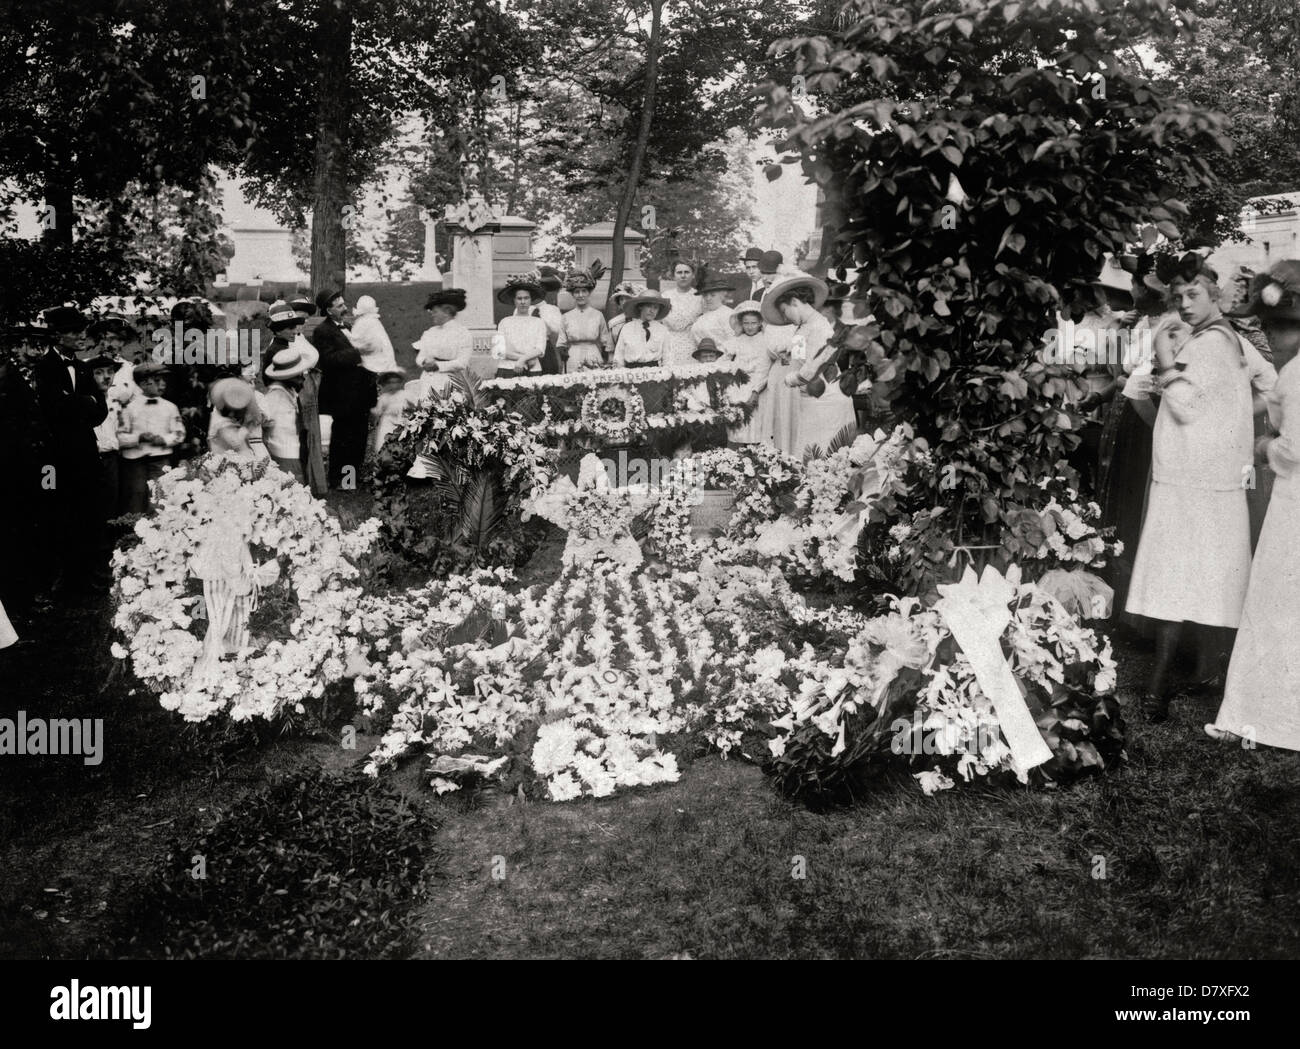 Wilbur Wright funeral - mourners and floral decorations at the grave of Wilbur Wright in Woodland Cemetery, Dayton, Ohio, 1912 Stock Photo